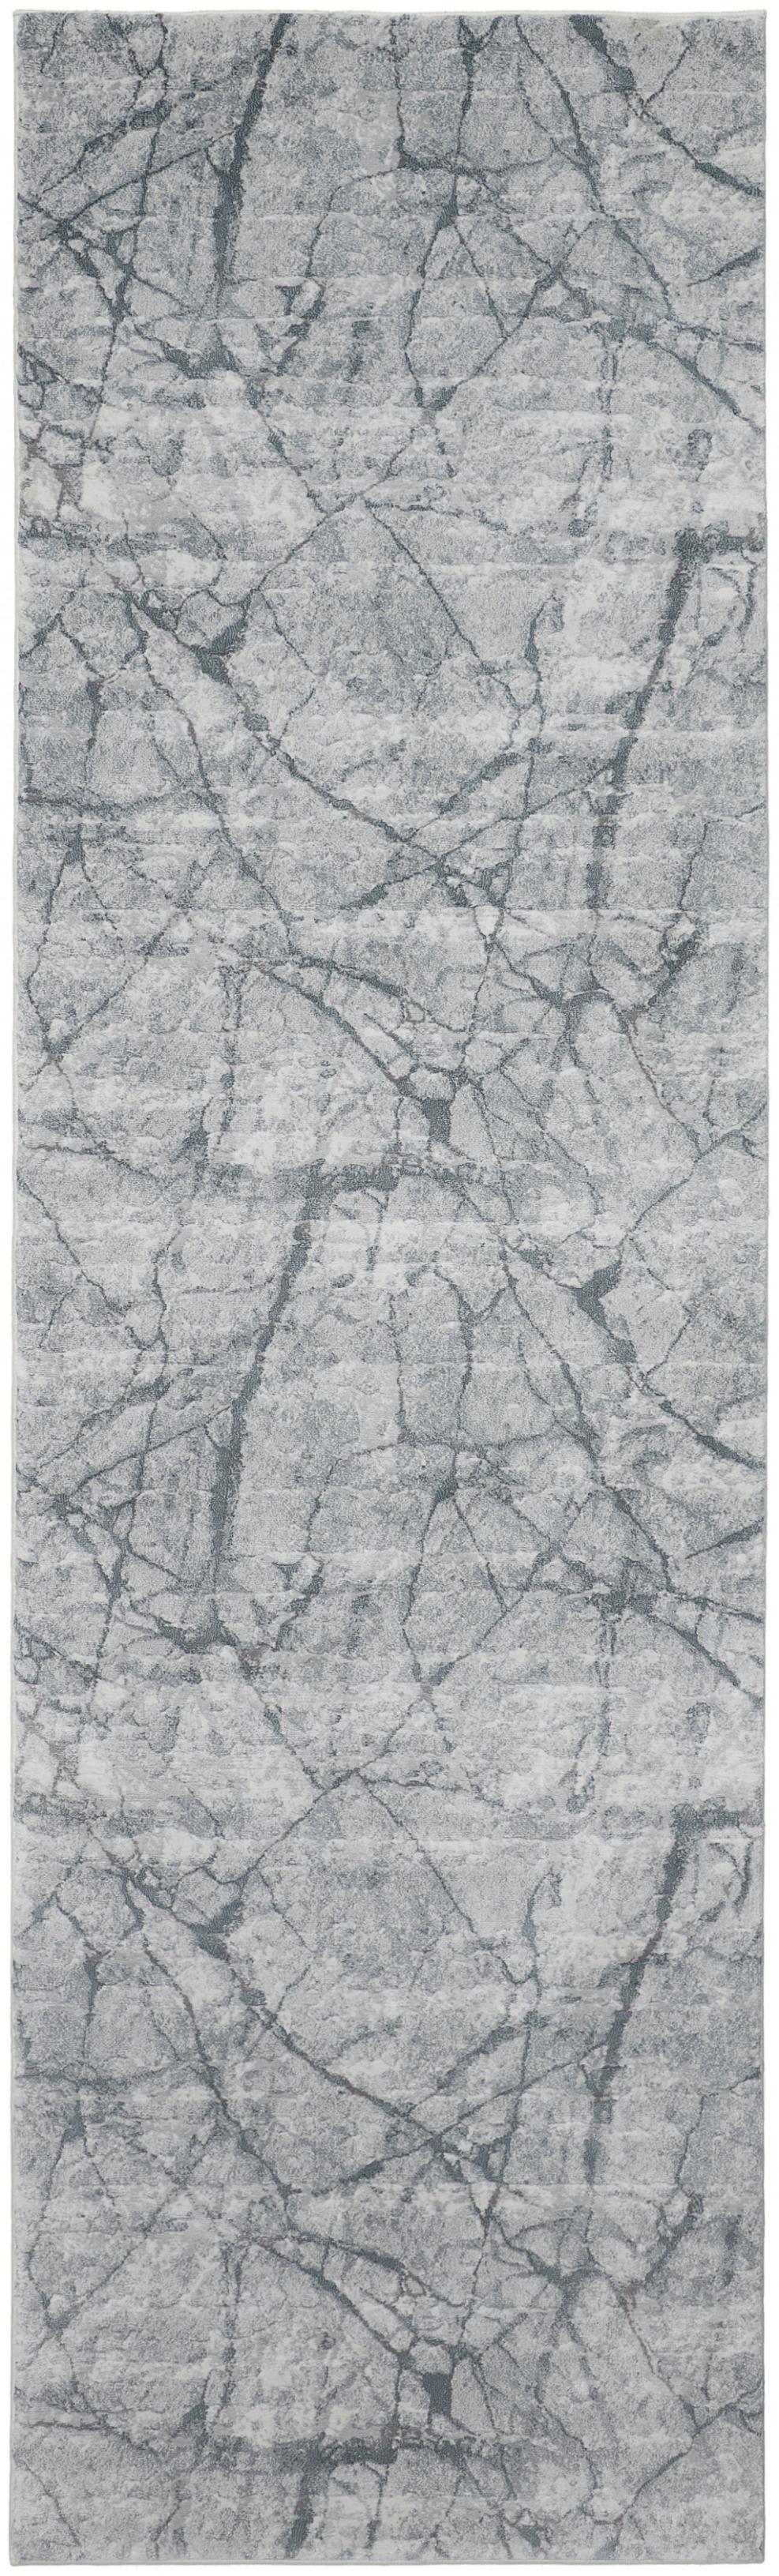 10' Blue Gray And Ivory Abstract Distressed Stain Resistant Runner Rug